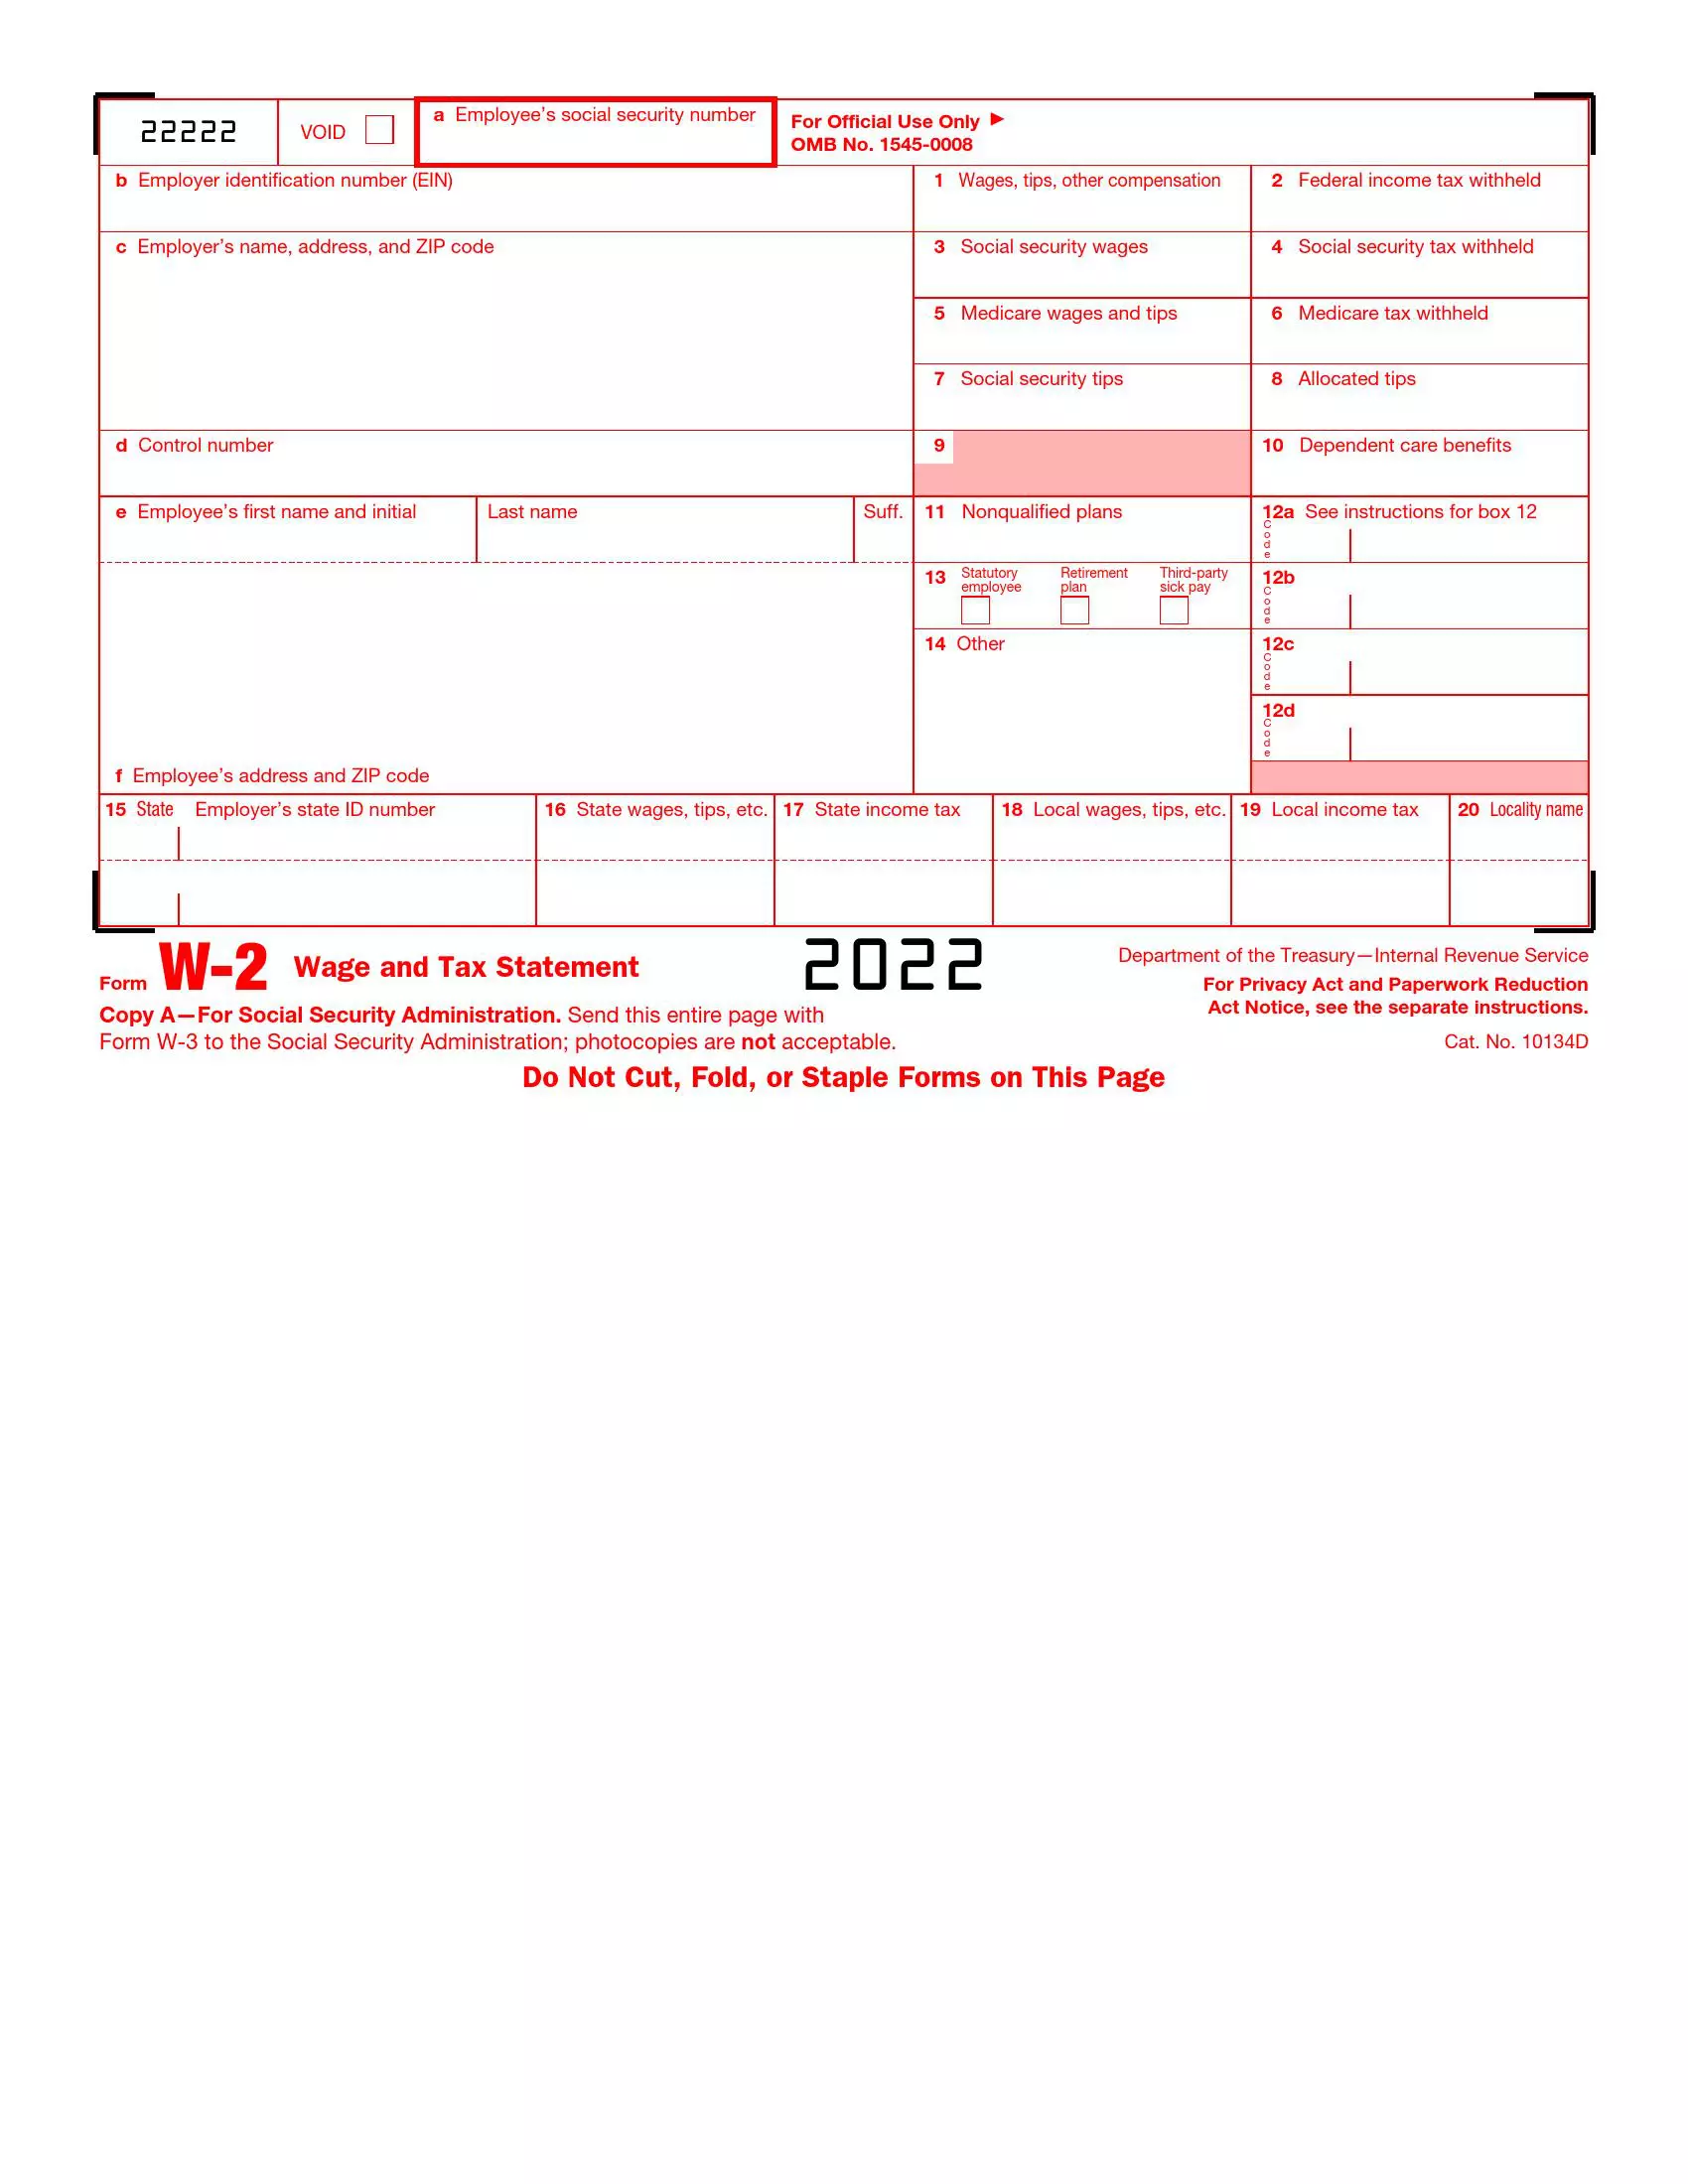 irs form w 2 2022 preview